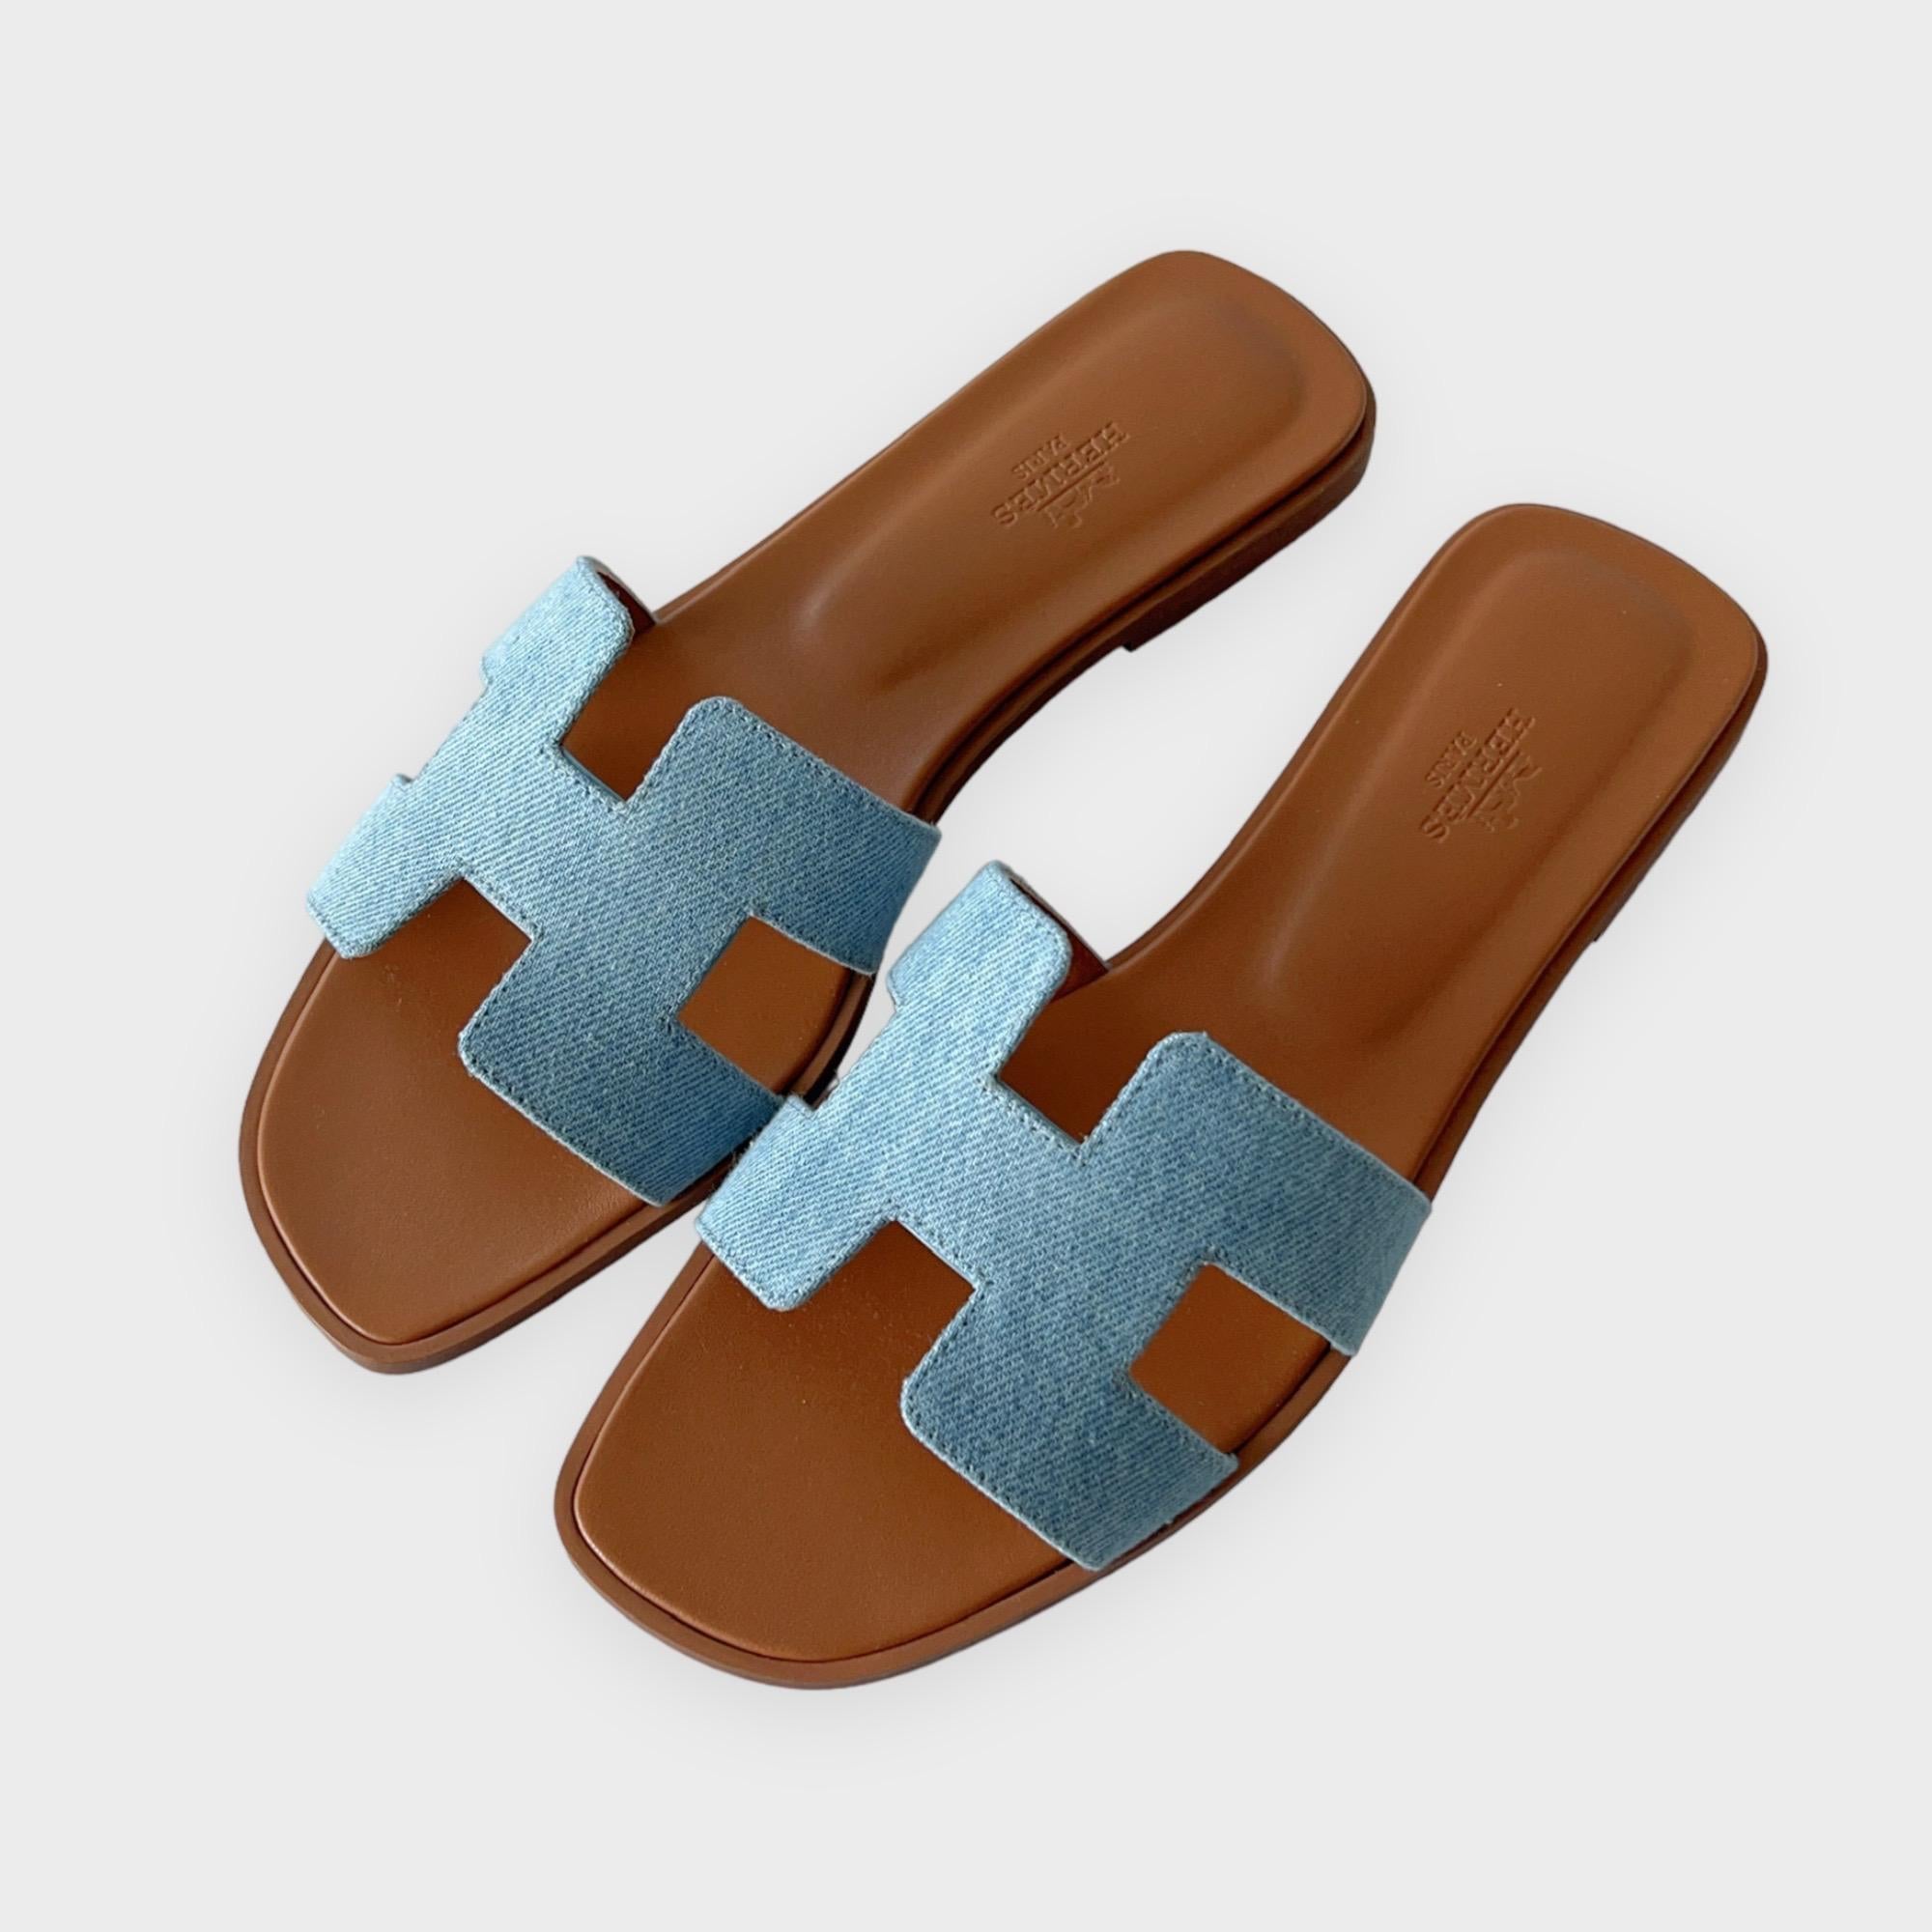 We have a beautiful pair of Hermès Denim Oran Sandals in Bleu Clair featuring the iconic H cut out. Classic, chic and comfy is how we would describe the Oran Sandal. A great pair of footwear for everyday wear. The Denim style in Bleu Clair is new